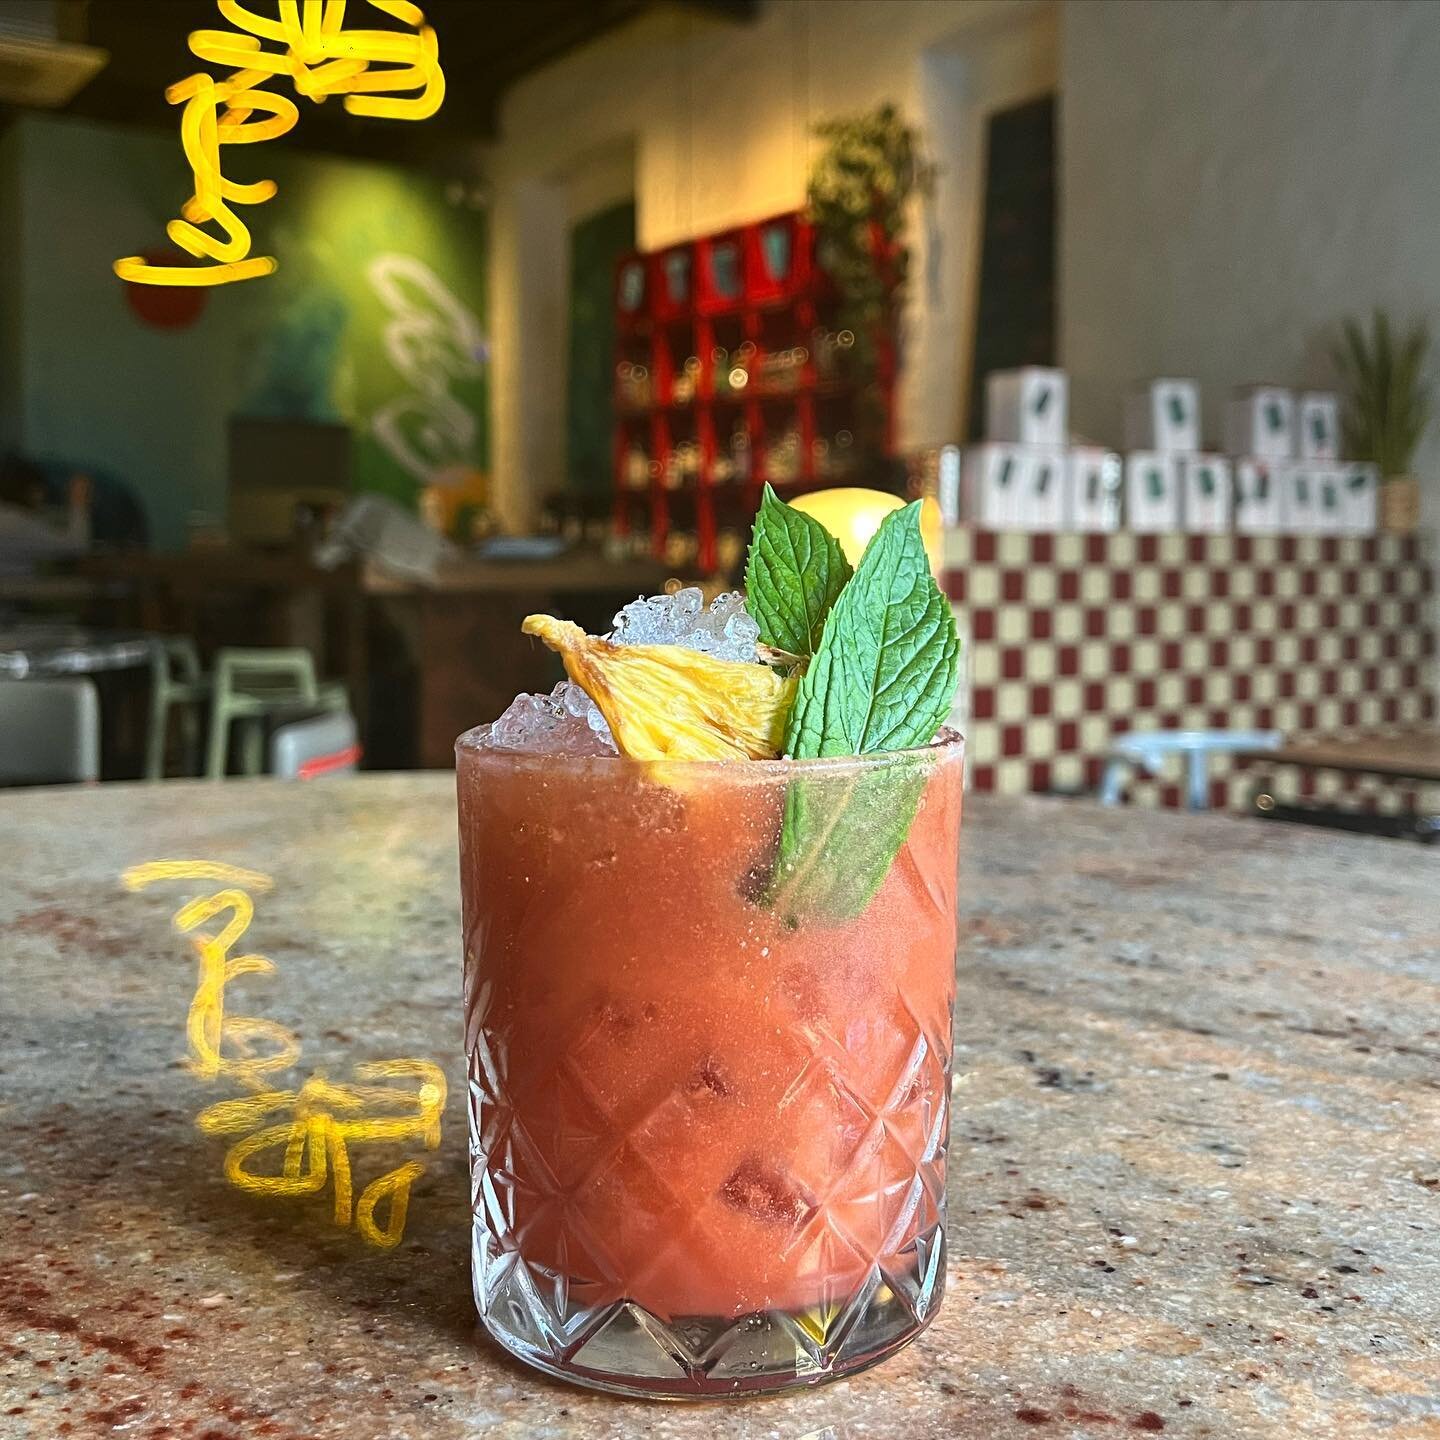 Let the weekend begin! 
What better way to start off your weekend shenanigans than with this lovely specimen. The unsung hero of our cocktail menu &ldquo;Get to the Chopper&rdquo; 
Weekend bookings are filling up fast but you can always pop down for 